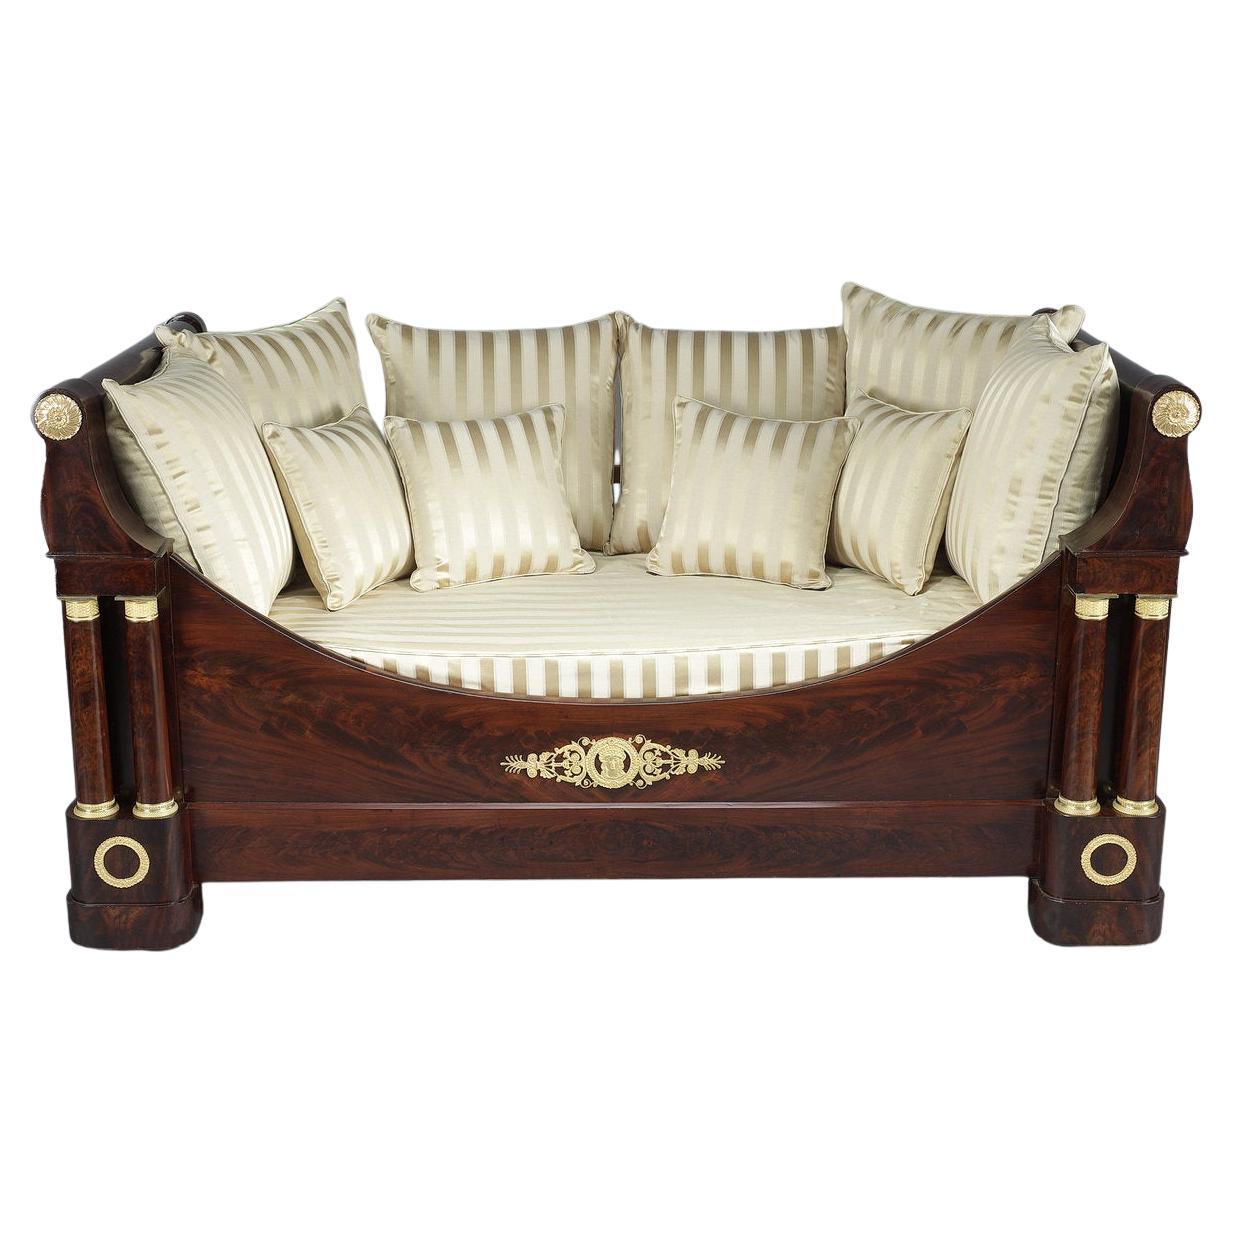 Restoration Period Mahogany and Gilt Bronze Sofa Bed, 19th Century For Sale